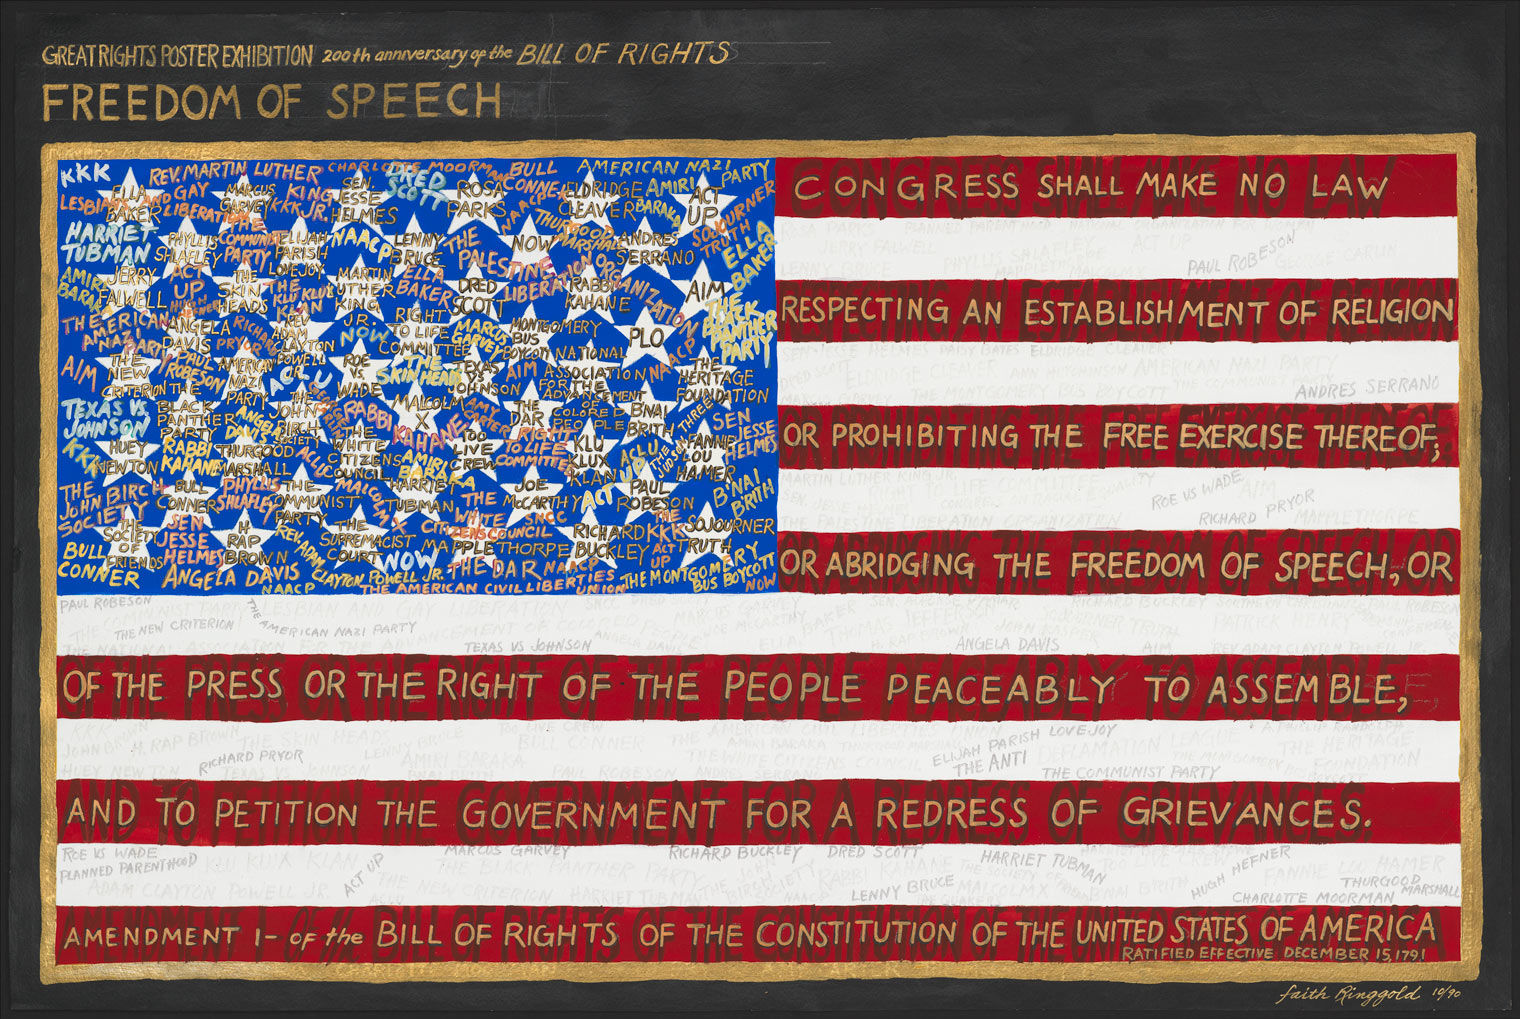 Faith Ringgold's artwork Freedom of Speech, which is a painting of the American flag with the First Amendment painted in gold on the red stripes and people's names written out over the stars and white stripes